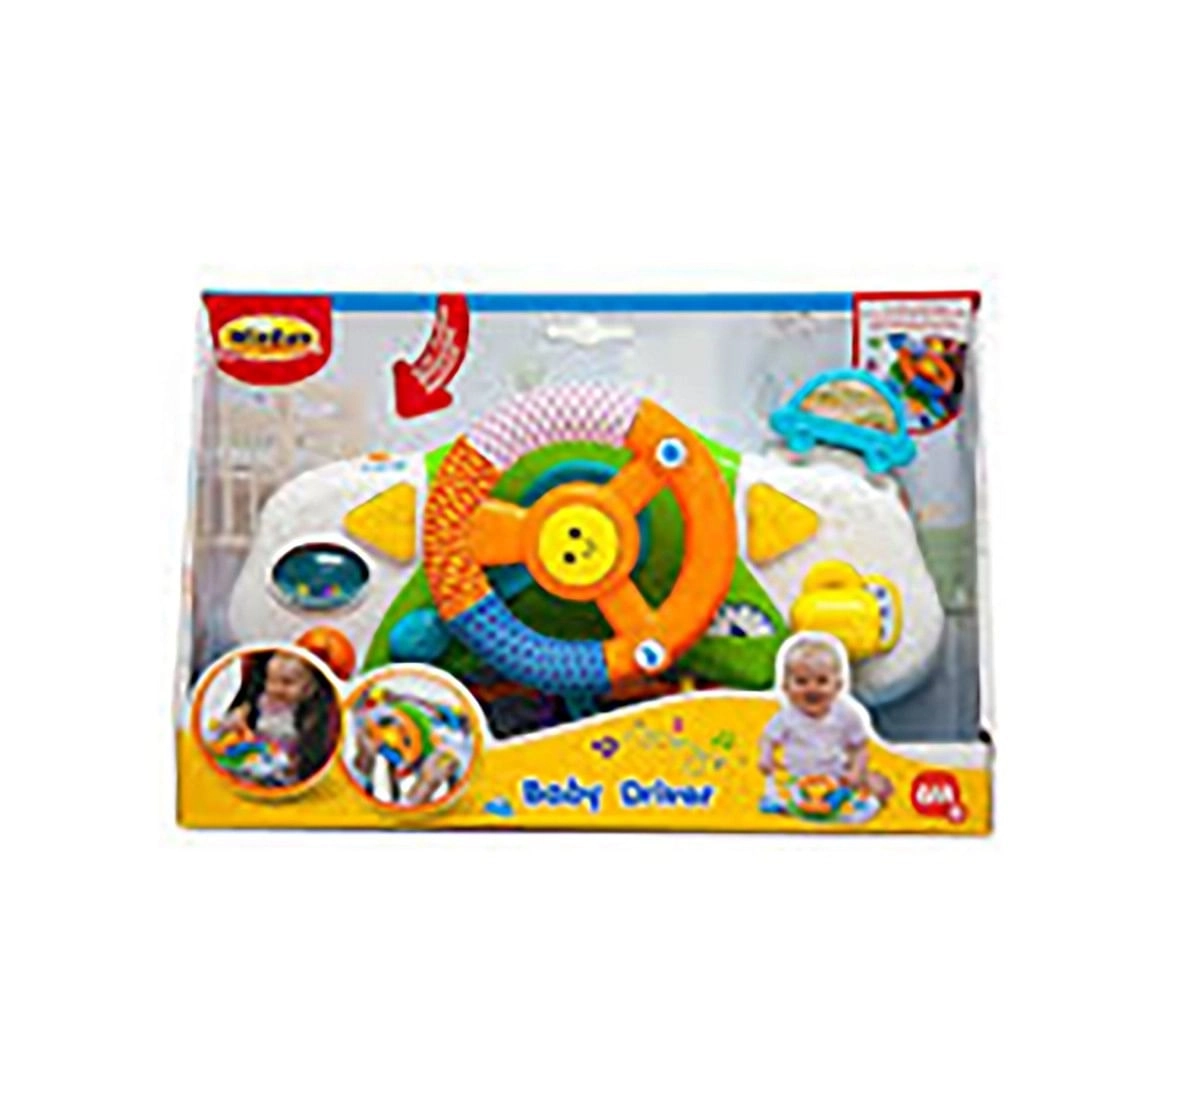 Winfun - Light & Sounds Baby Crib Driver    Learning Toys for Kids age 6M+ 